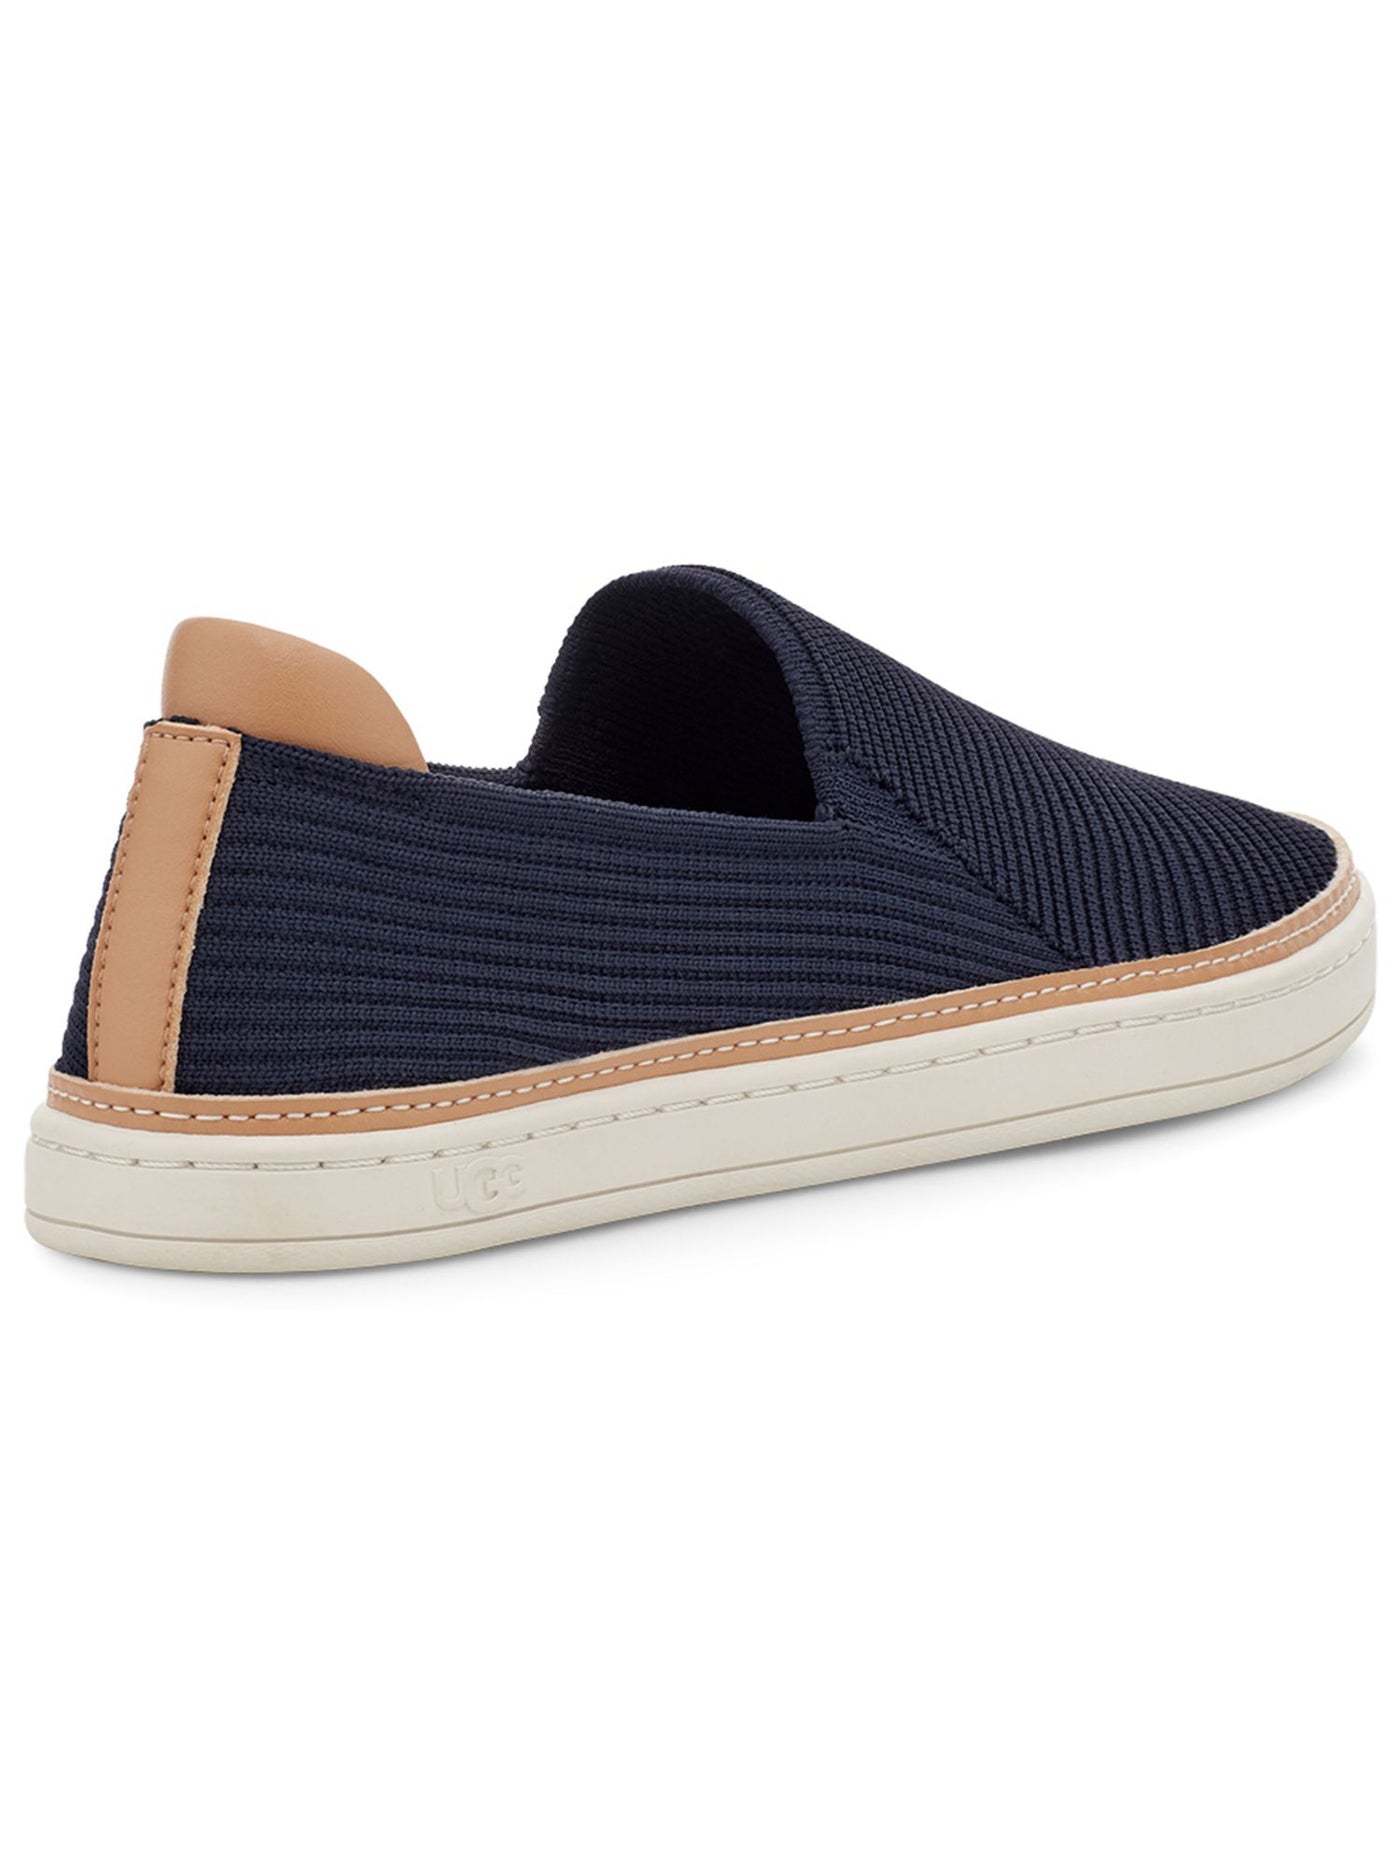 UGG Womens Navy Knit Goring Padded Sammy Round Toe Slip On Sneakers Shoes 6